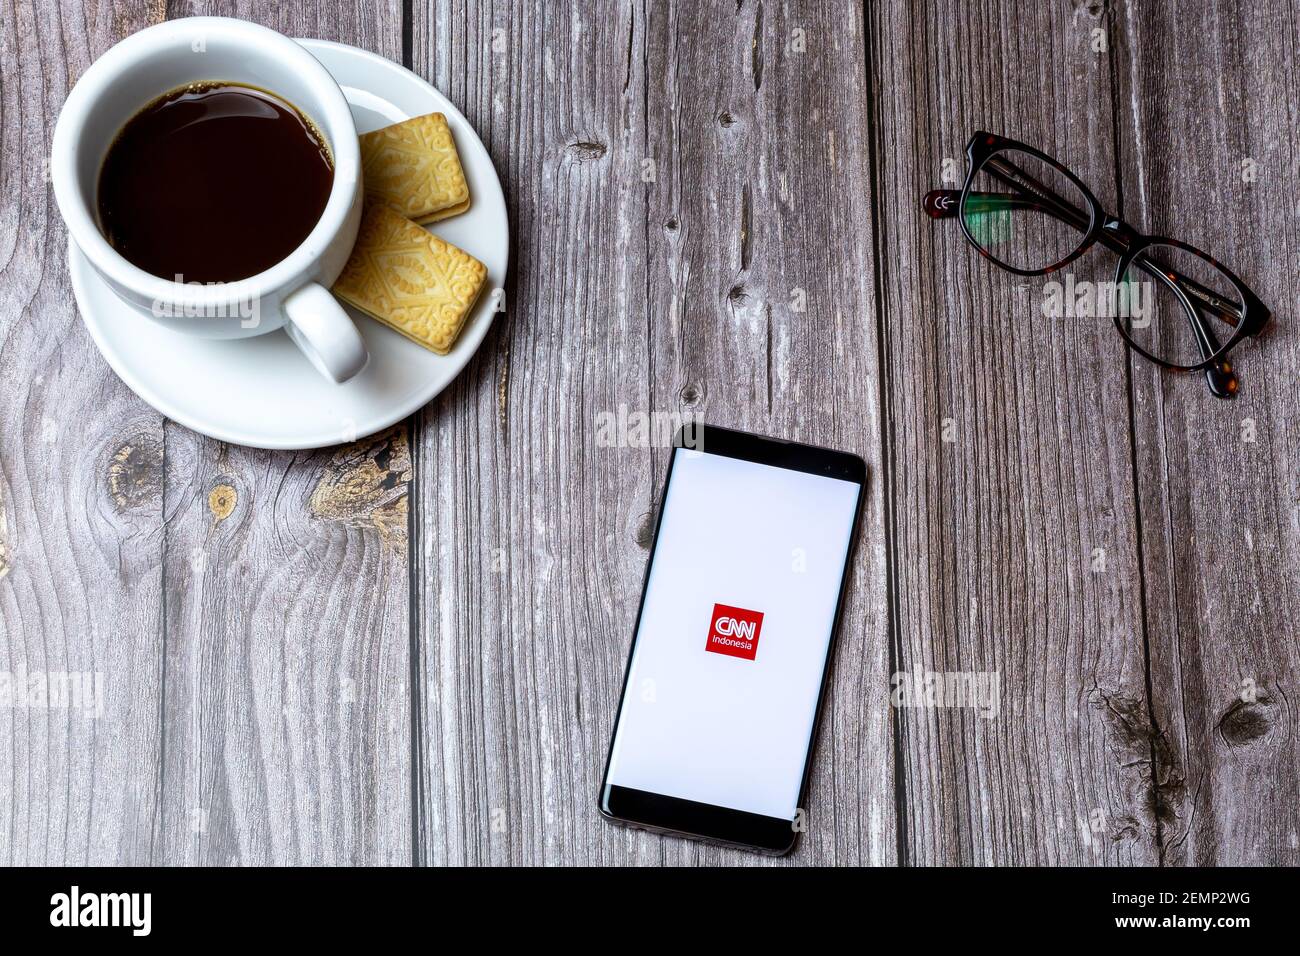 A mobile phone or cell phone on a wooden table with the CNN Indonesia app open next to a coffee and glasses Stock Photo